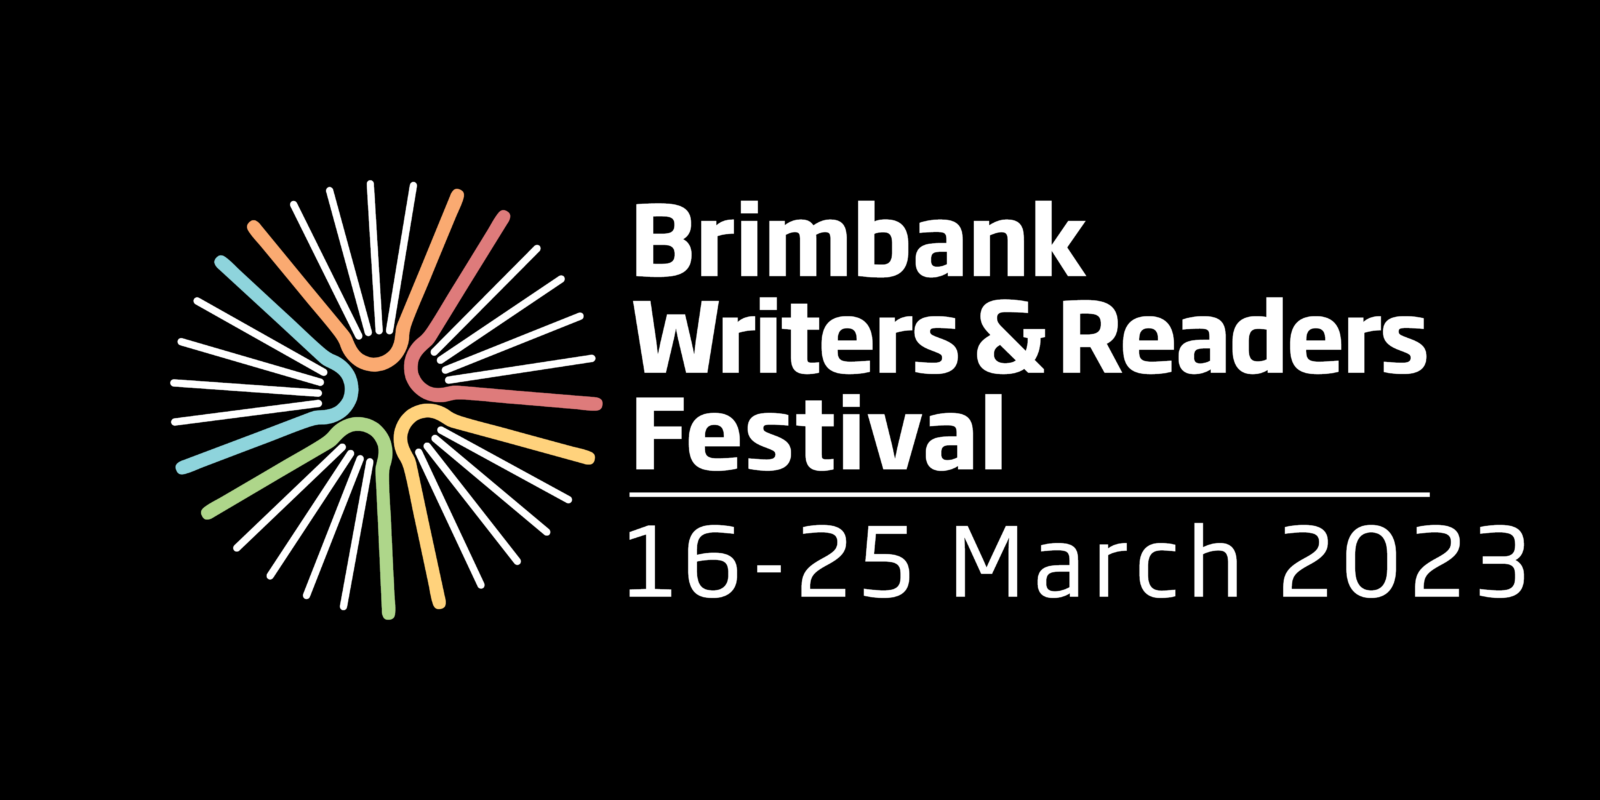 Brimbank Writers & Readers Festival 16-25 March 2023